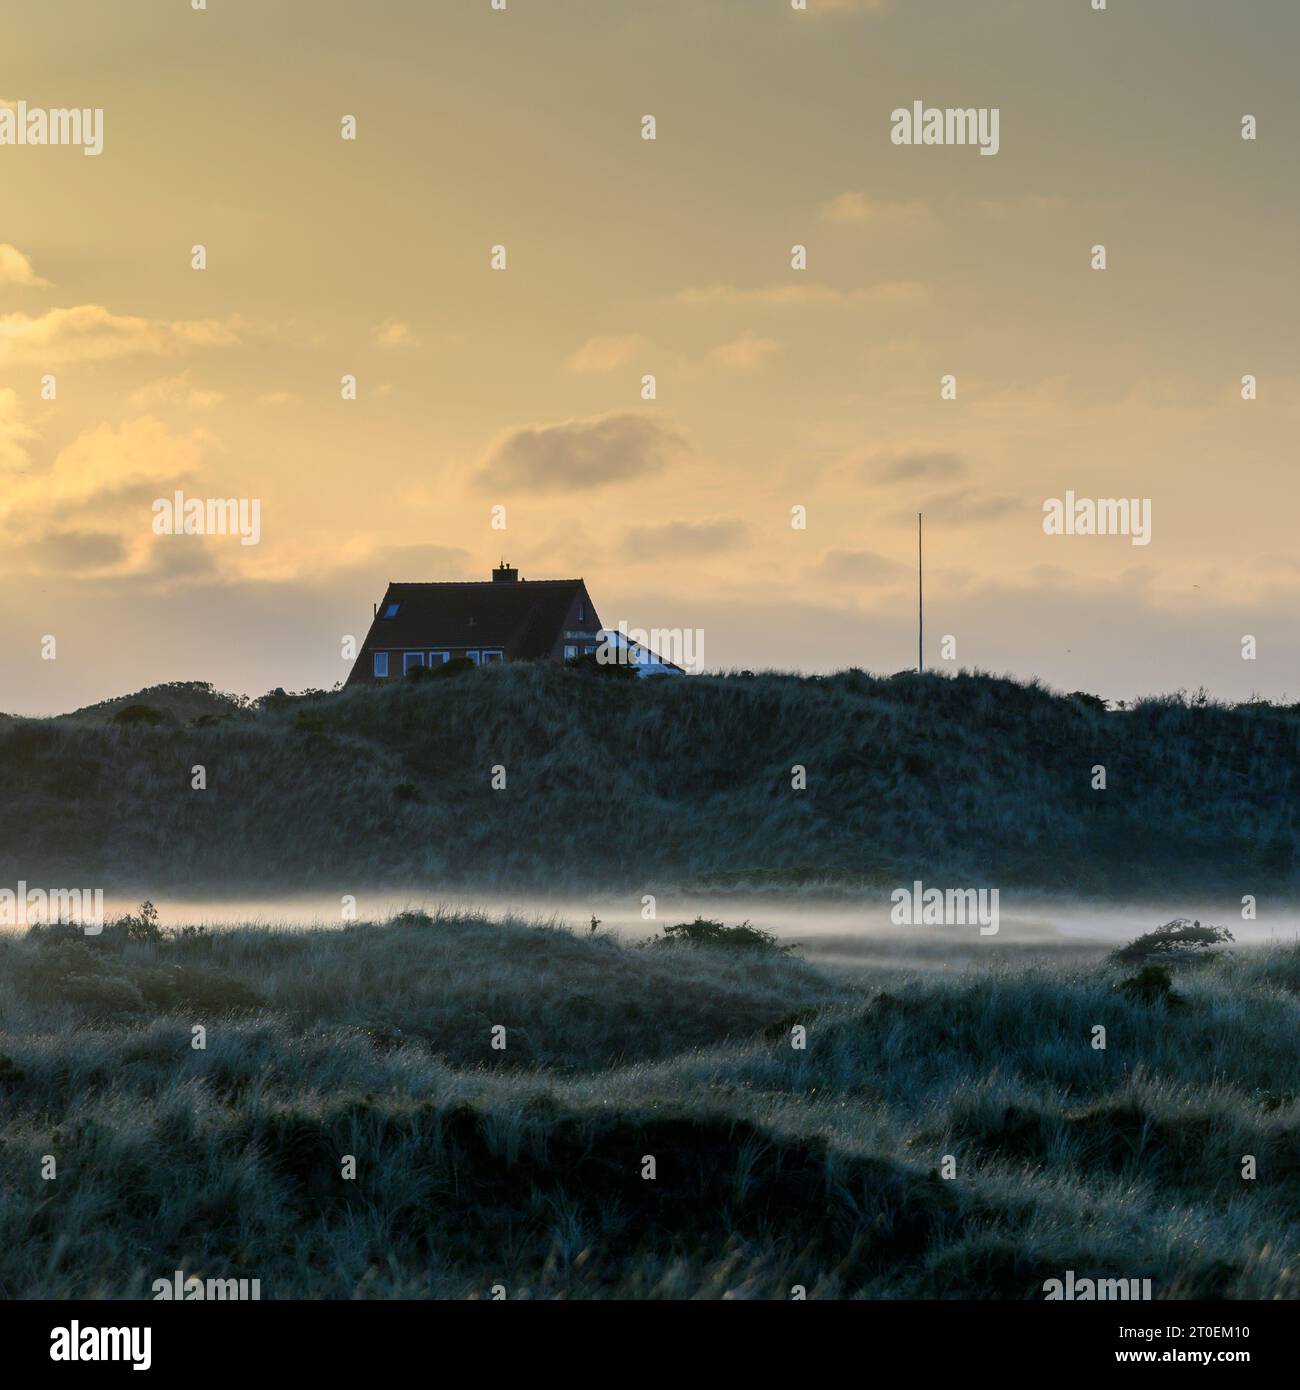 Germany, Lower Saxony, Juist, morning atmosphere on the island. Stock Photo